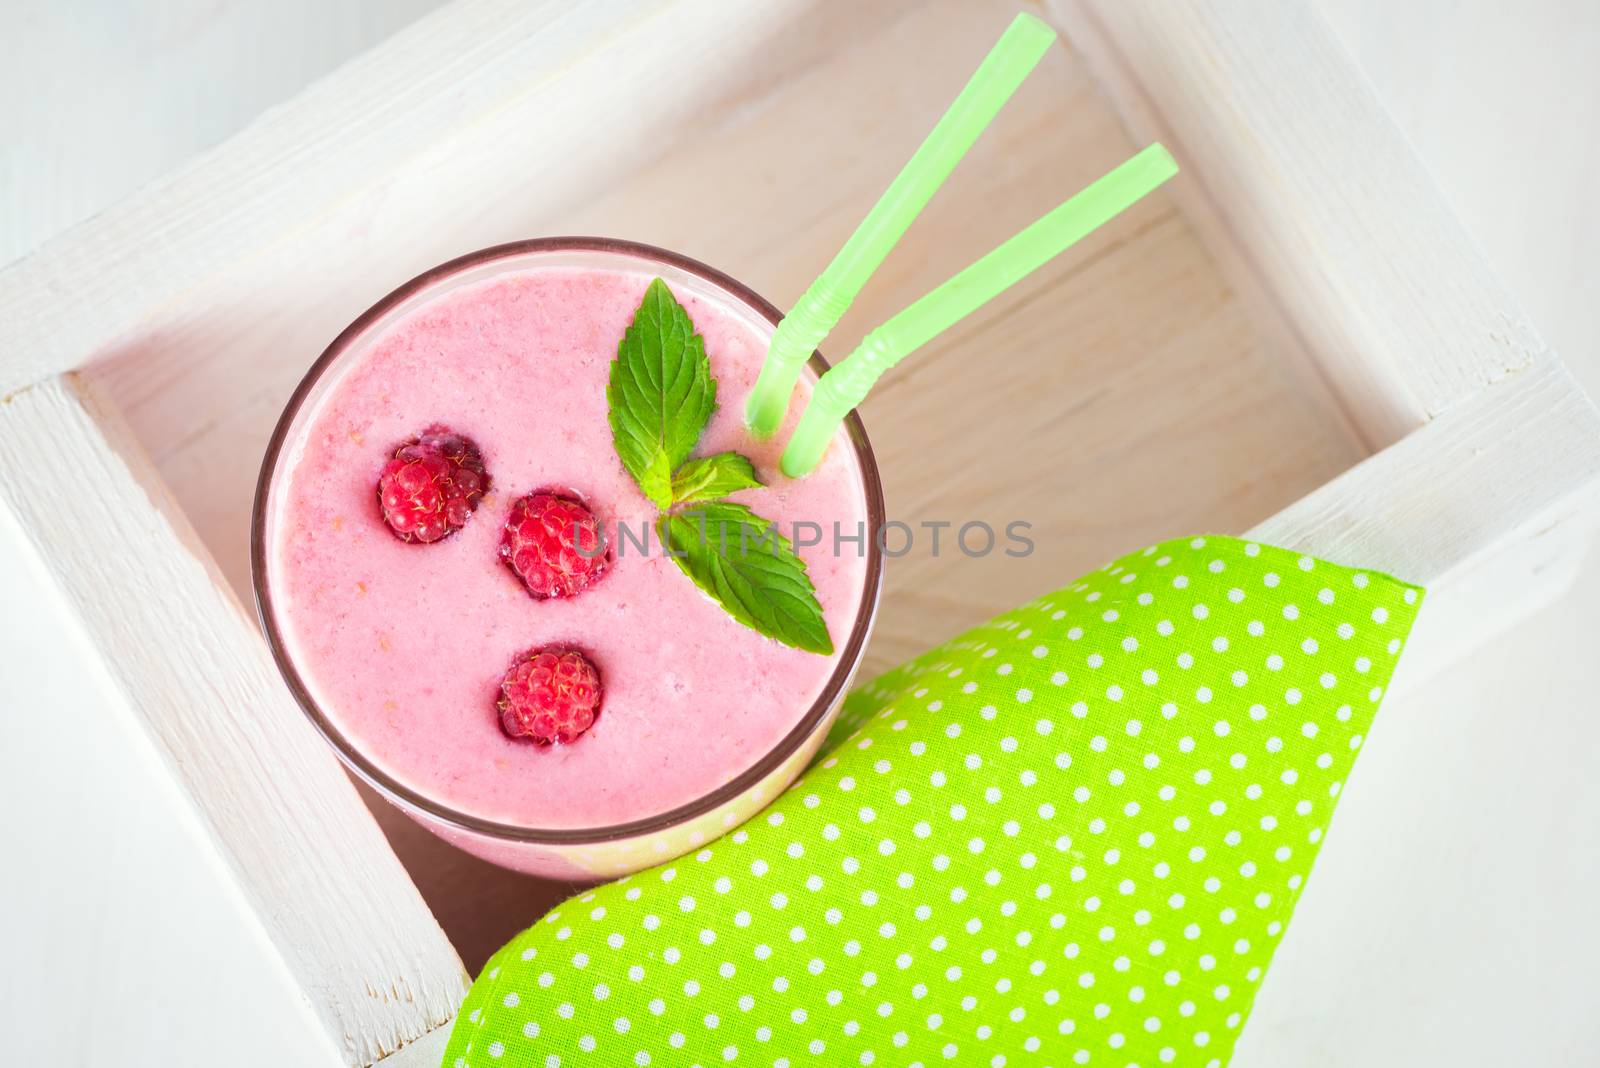 Raspberry dairy smoothie with fresh berries and sprig of mint with two green cocktail stick in a decorative box on a white wooden table